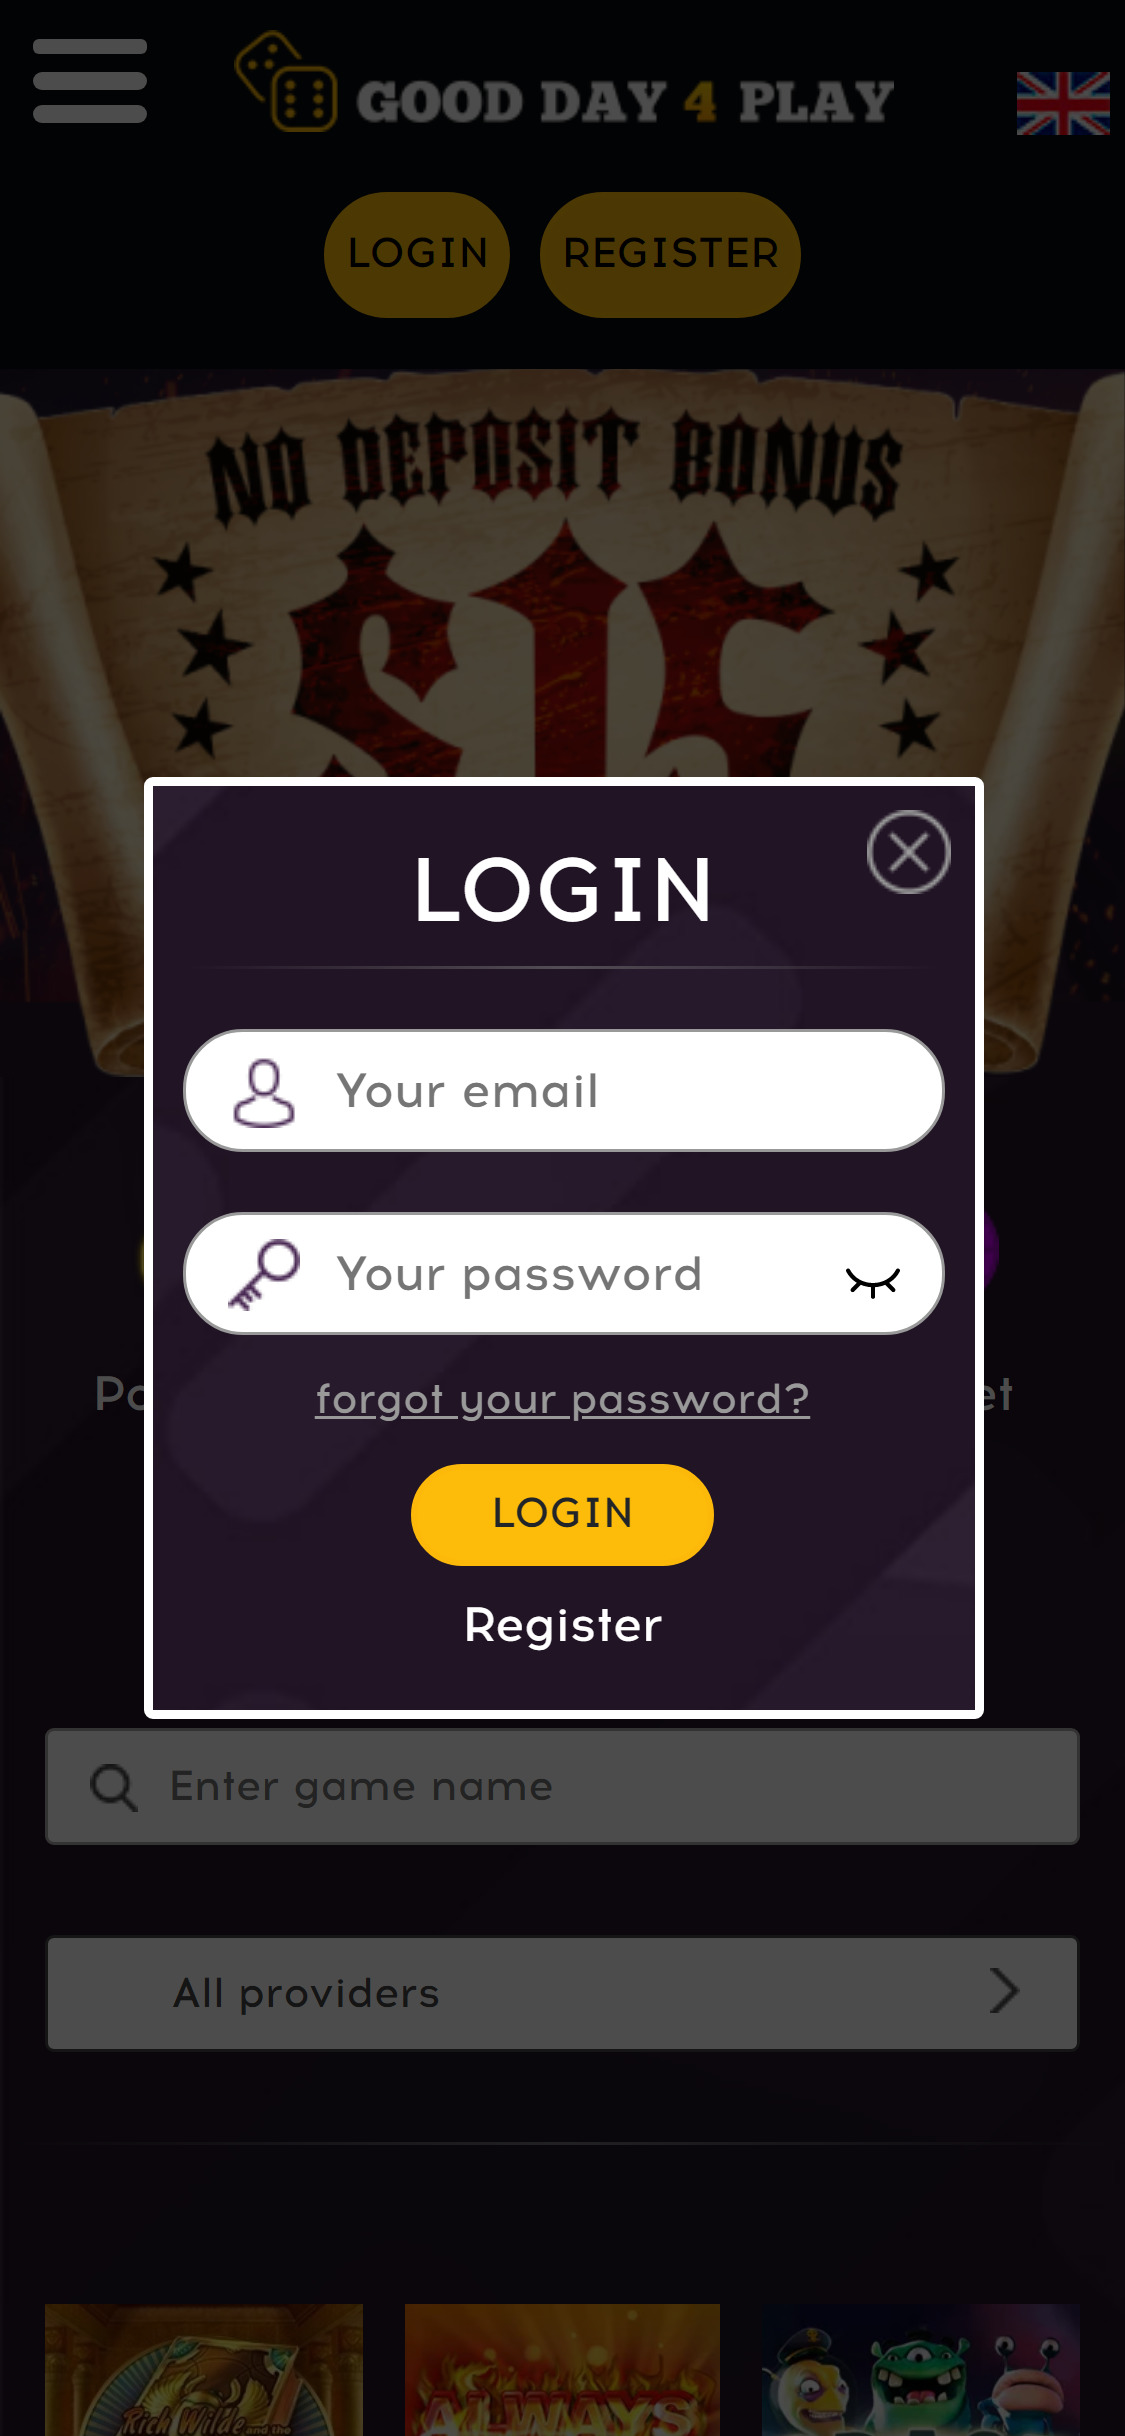 Good Day 4 Play Casino Mobile Login Review